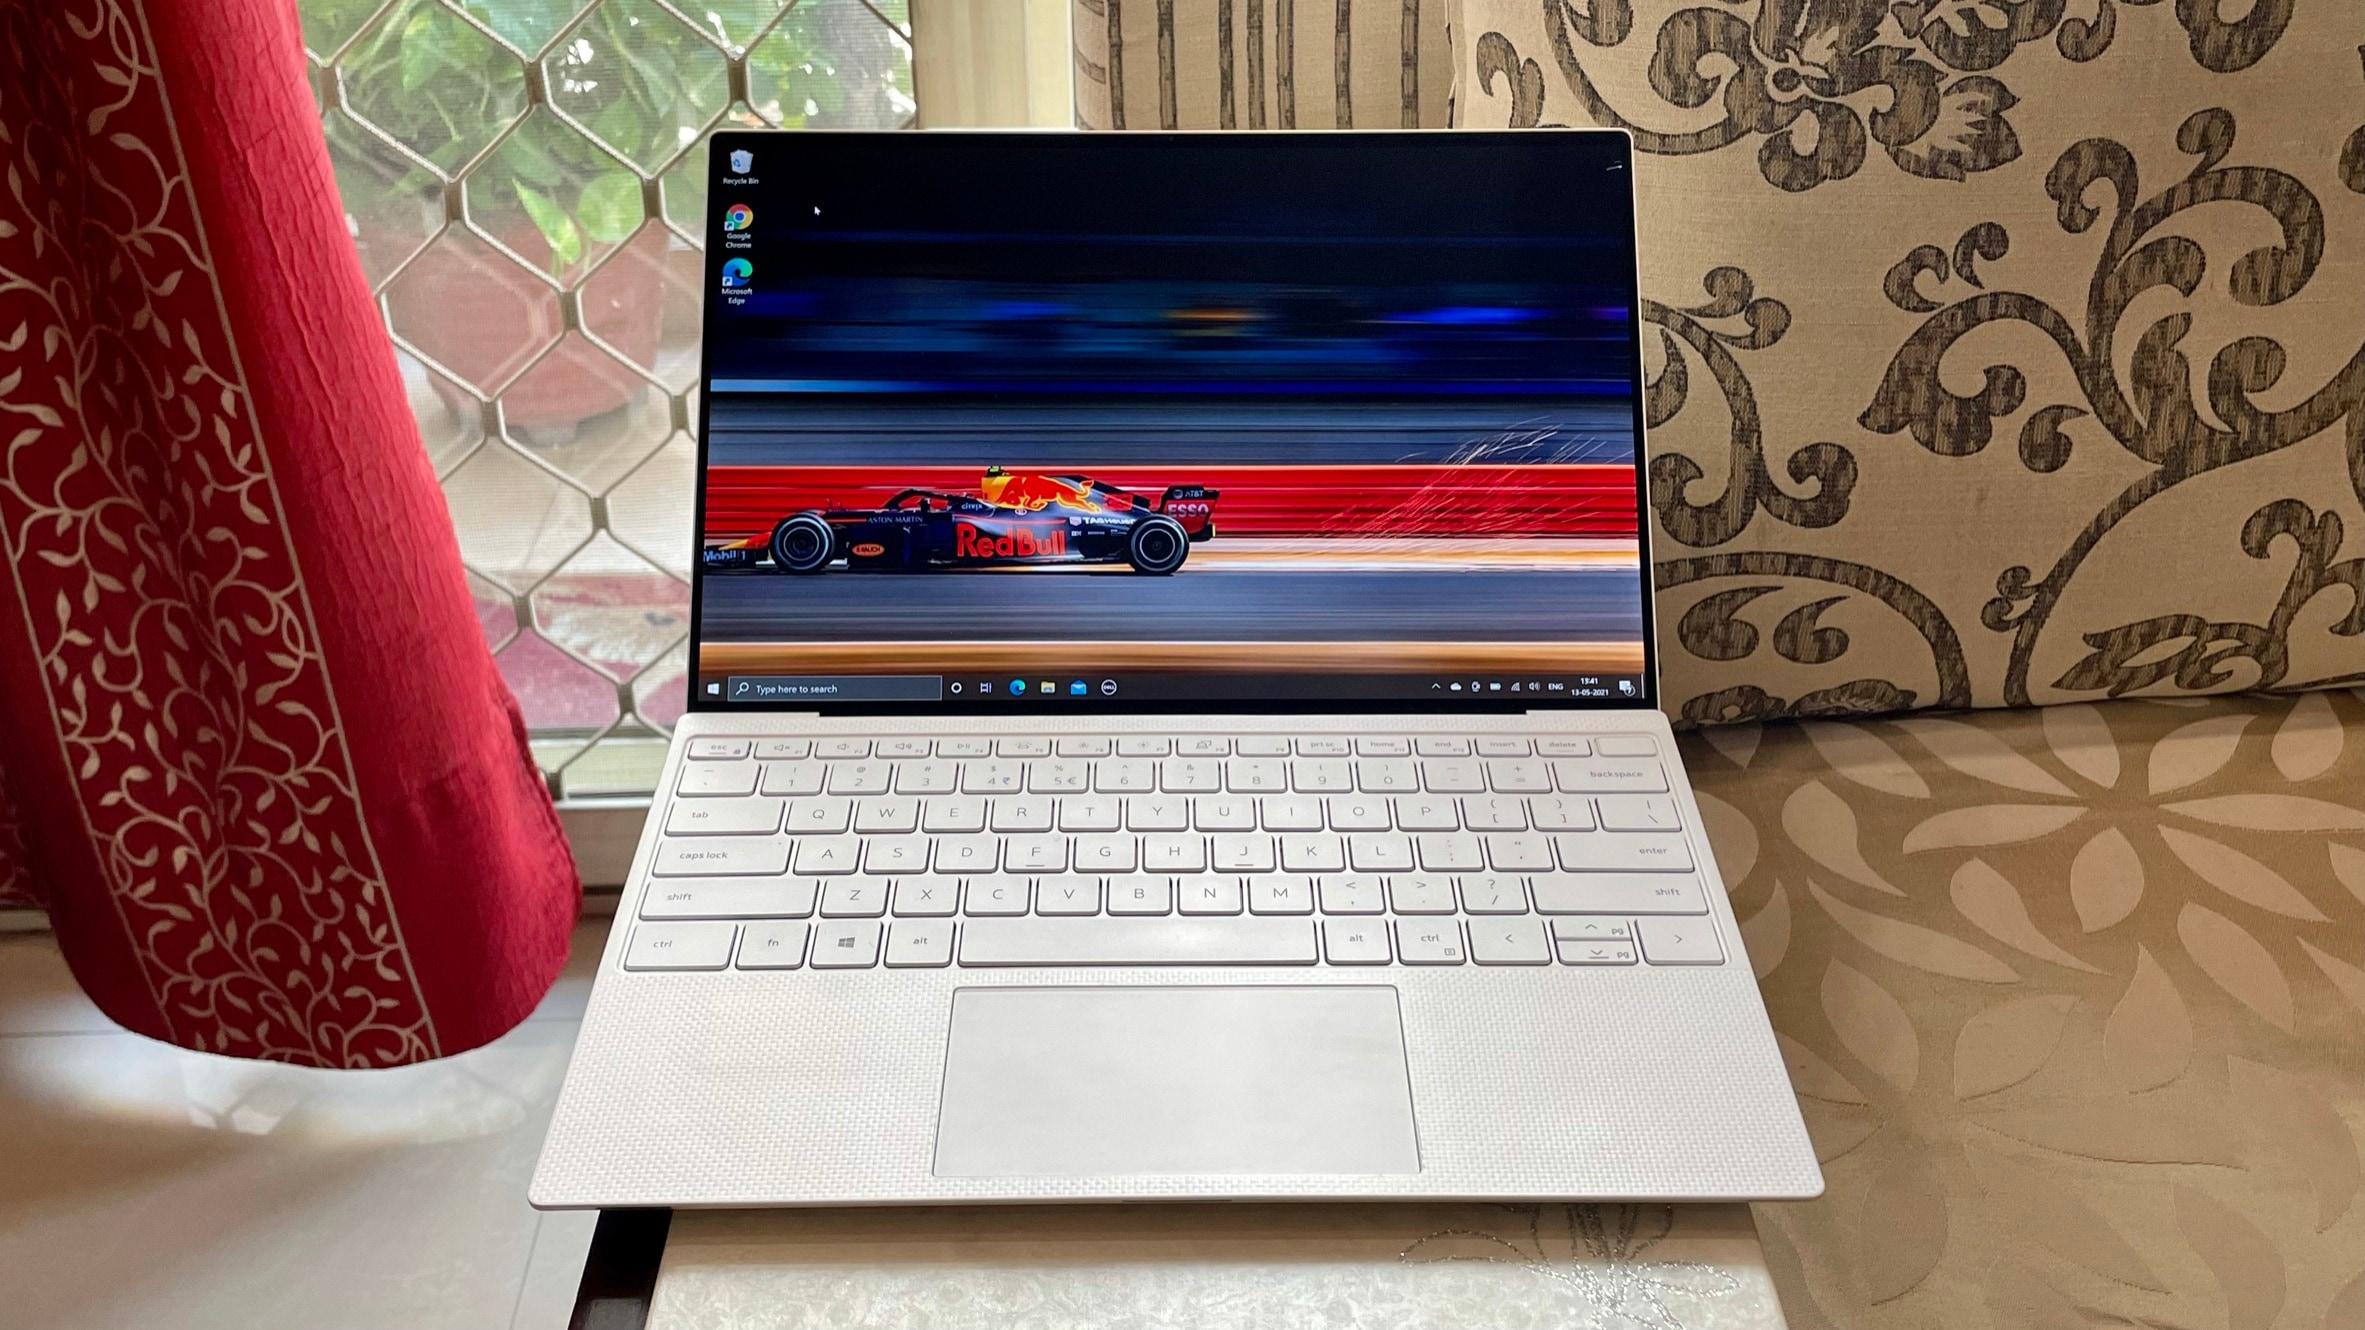 Dell XPS 13 9310 review: The Intel 11th-gen eye-candy